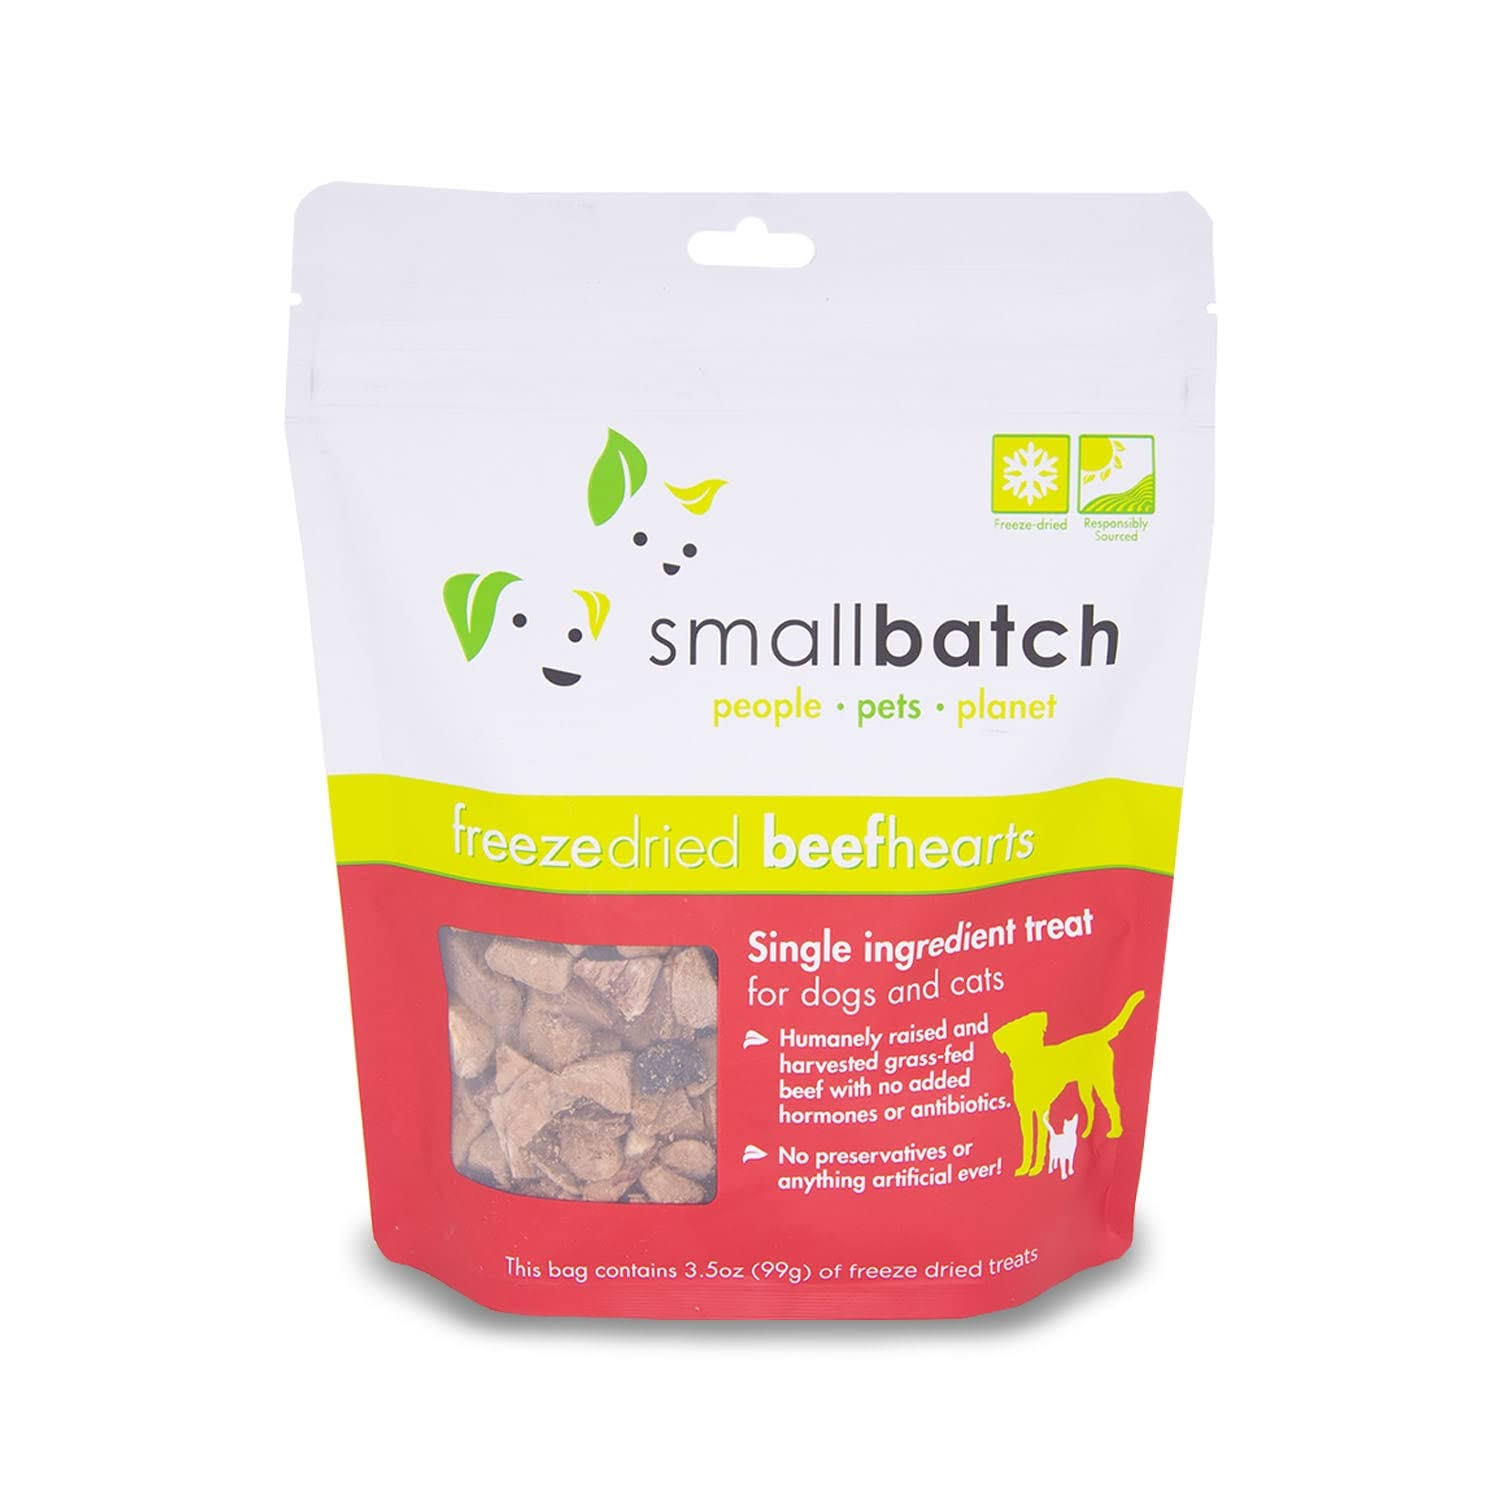 Smallbatch Pets Premium Freeze-Dried Beef Heart Treats for Dogs and Cats 3.5 oz Made and Sourced in The USA Single Ingredient Humanely Raise Meat